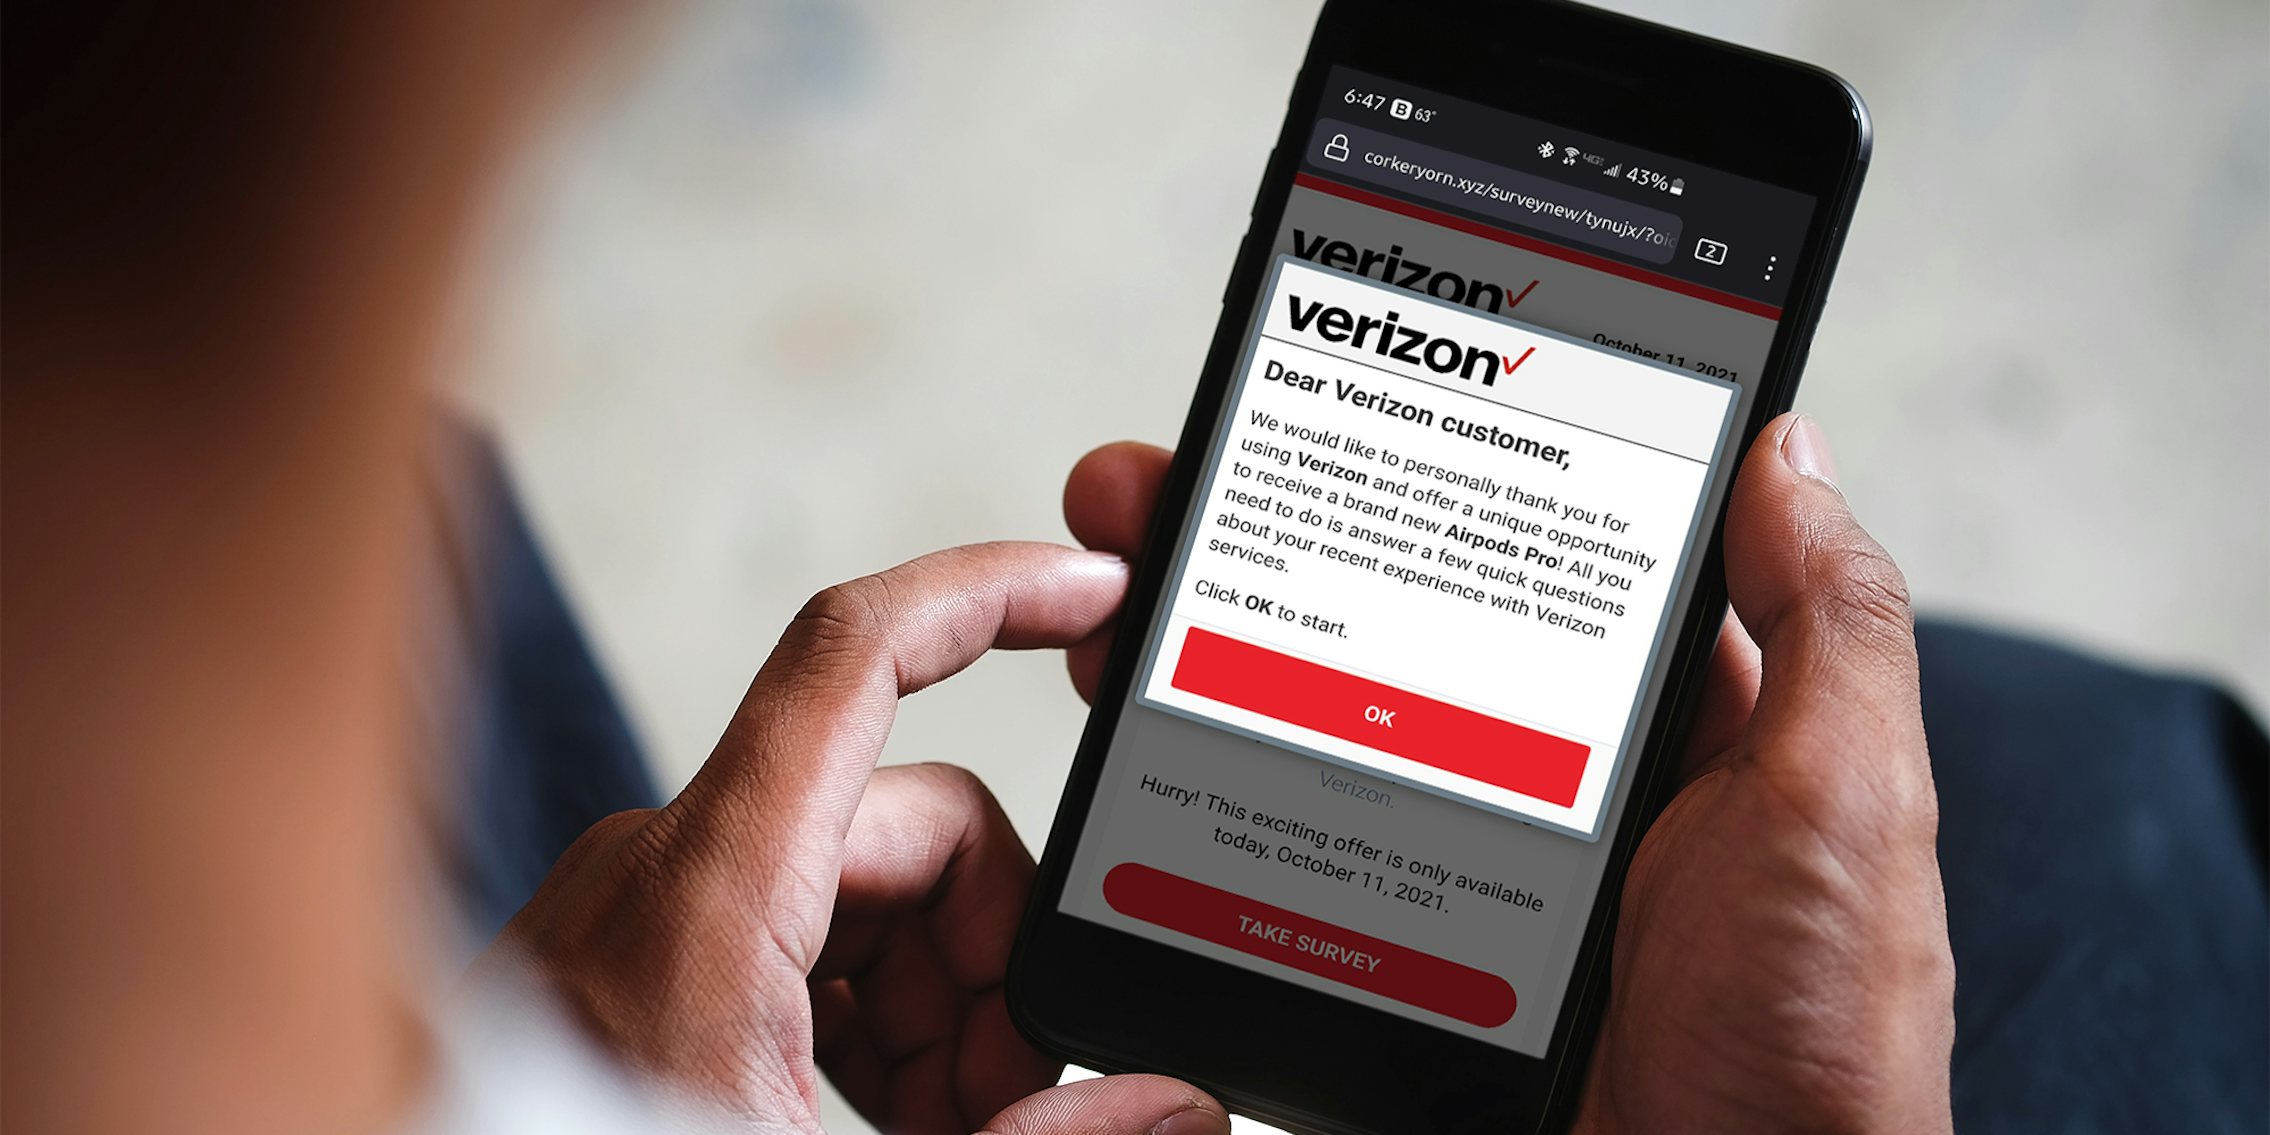 Hurry get this limited time deal” Verizon wants to scam you! : r/Scams